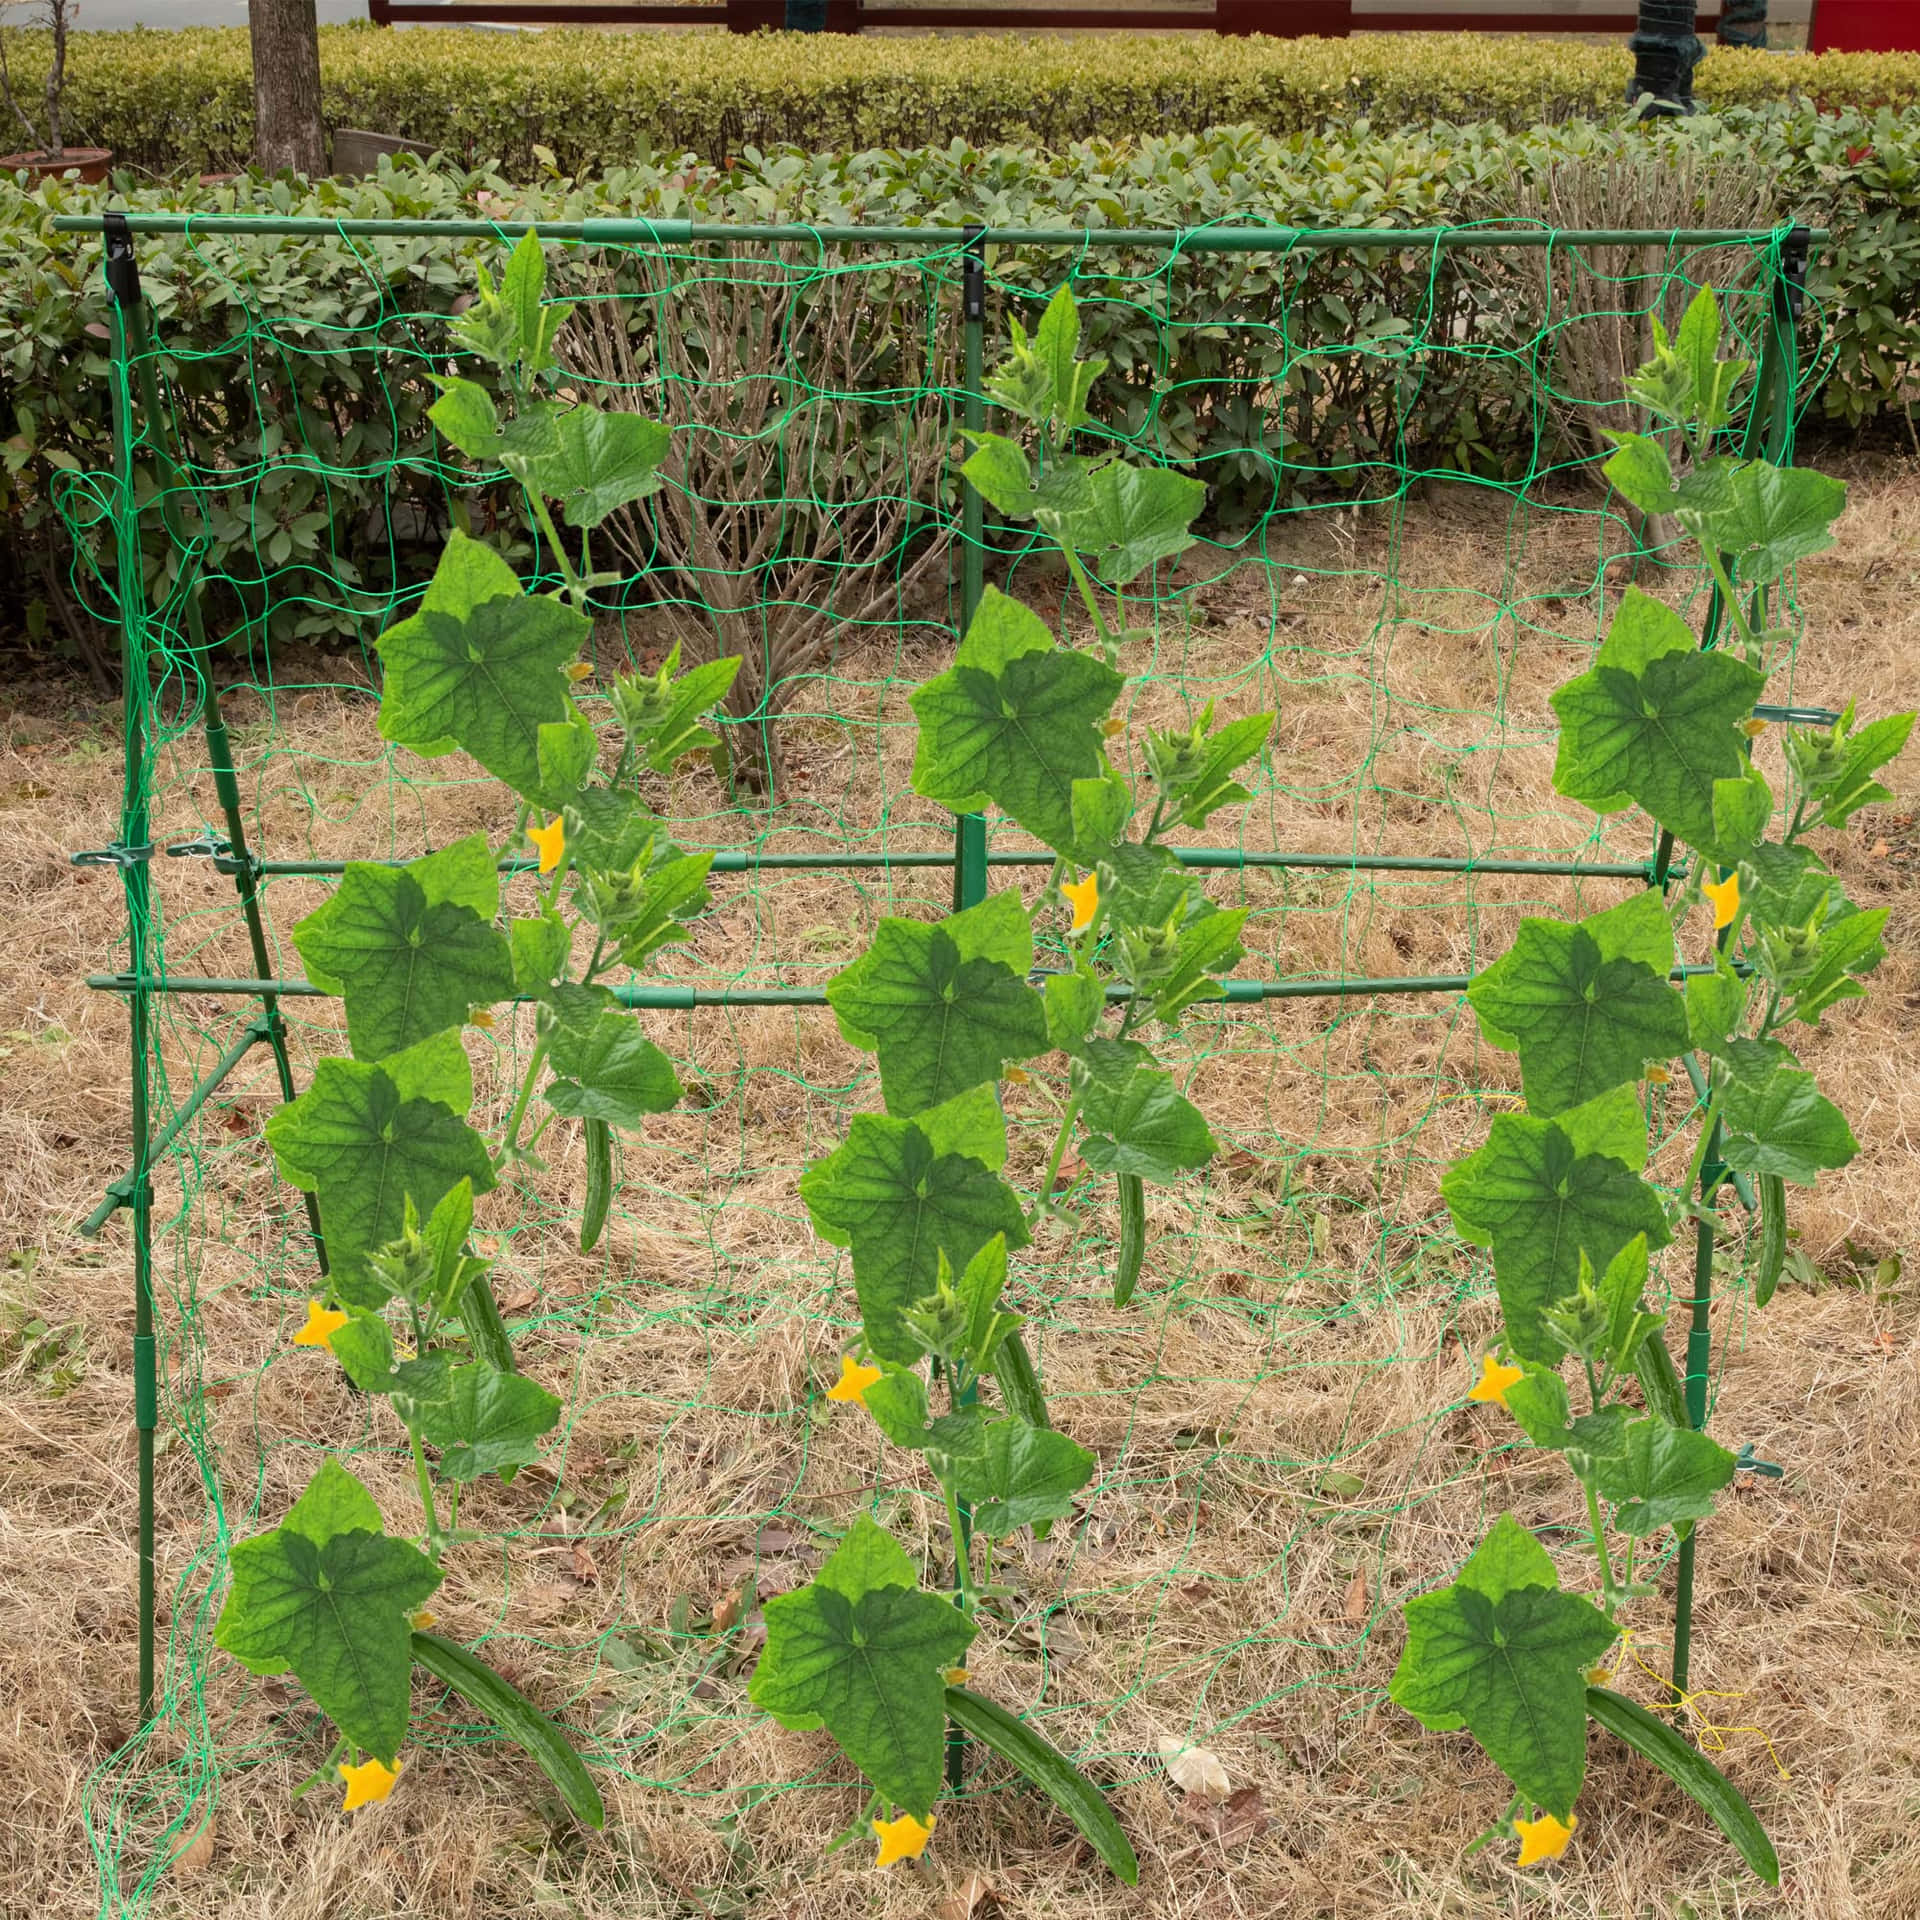 Robust Cucumber Trellis Supporting Healthy Plants